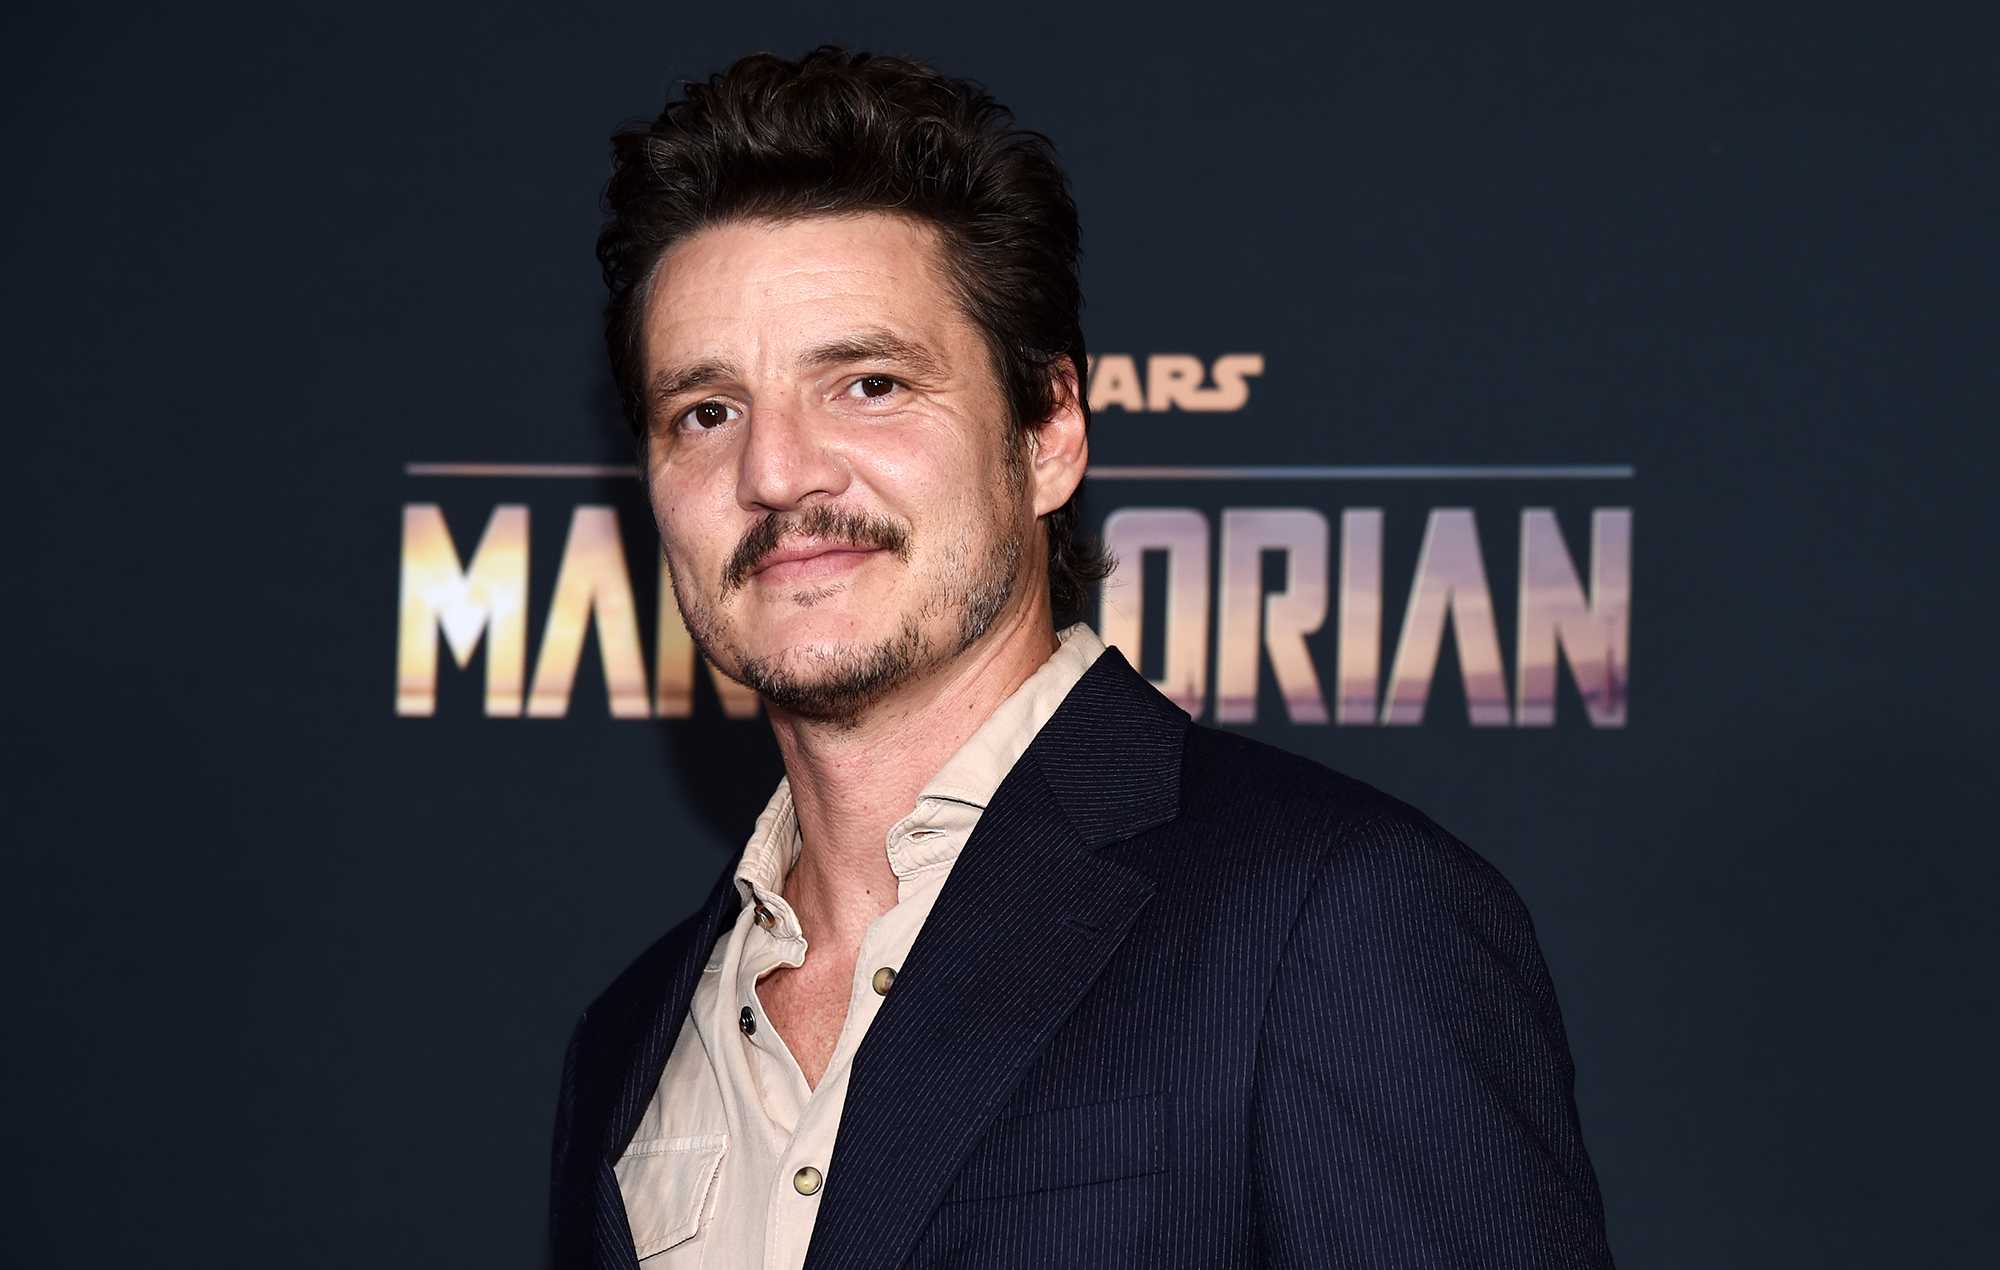 From Game of Thrones to The Last of Us: Pedro Pascal's journey to Emmy contention